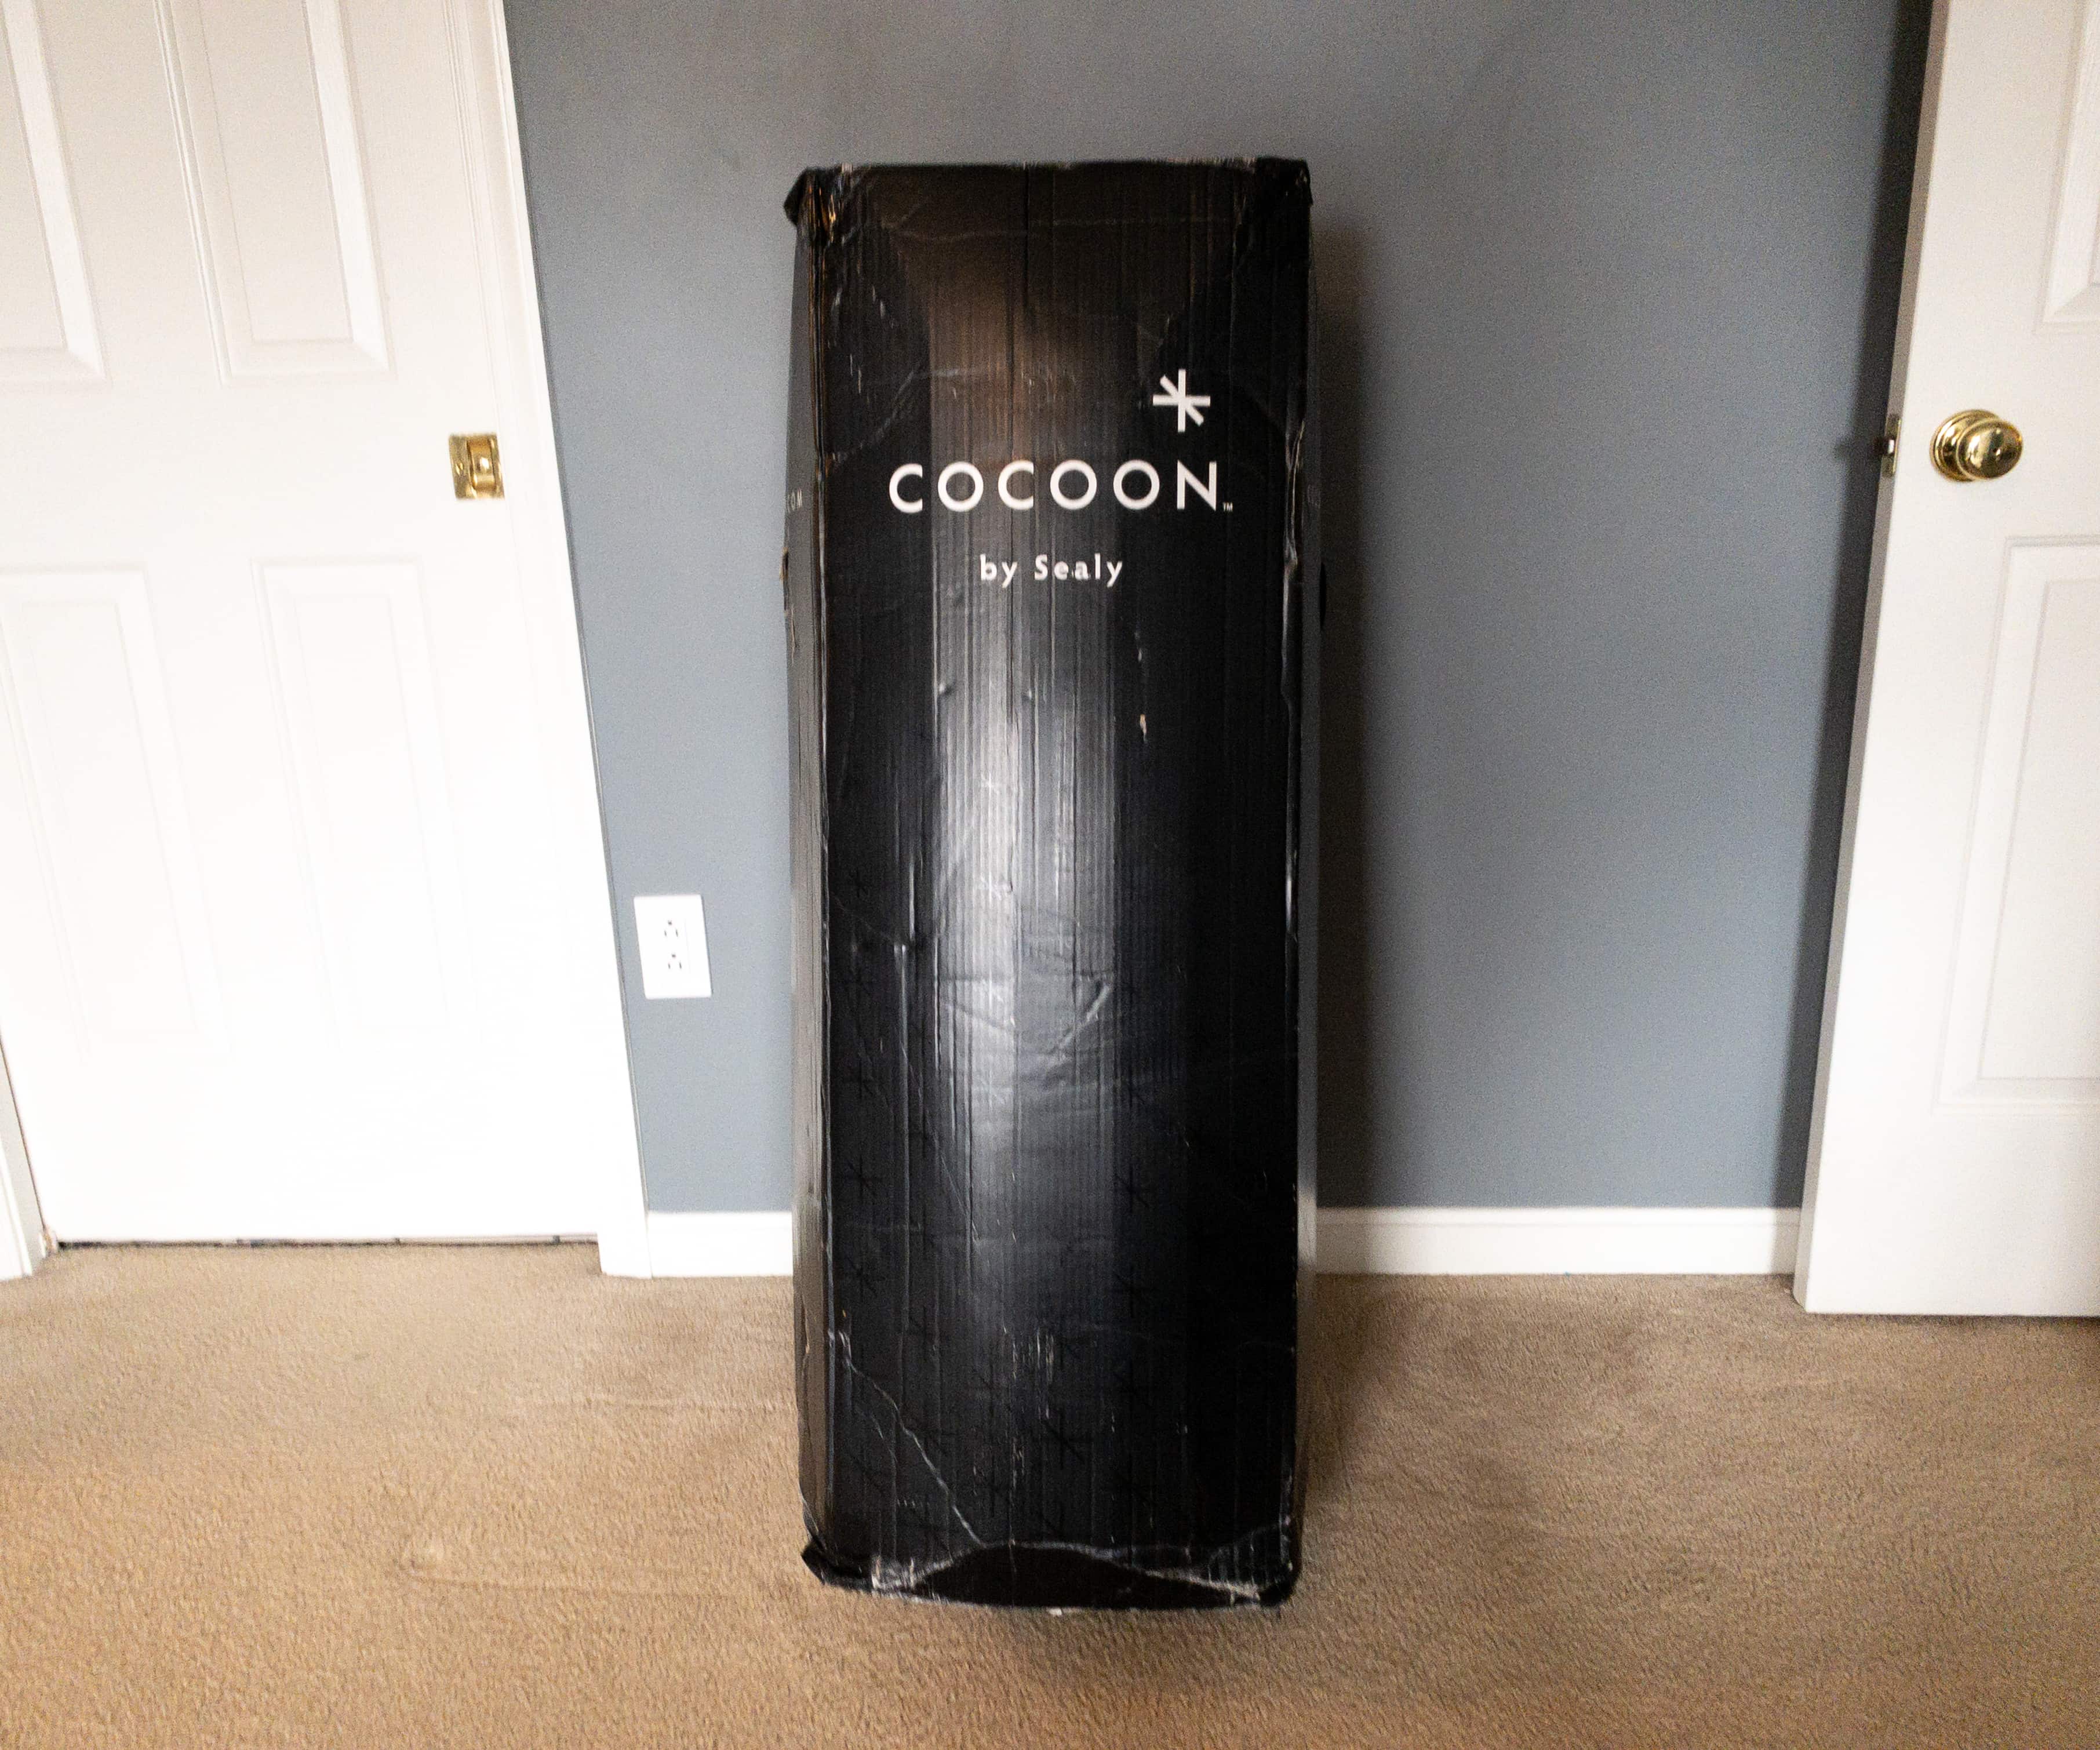 discount codes for sealy cocoon mattress